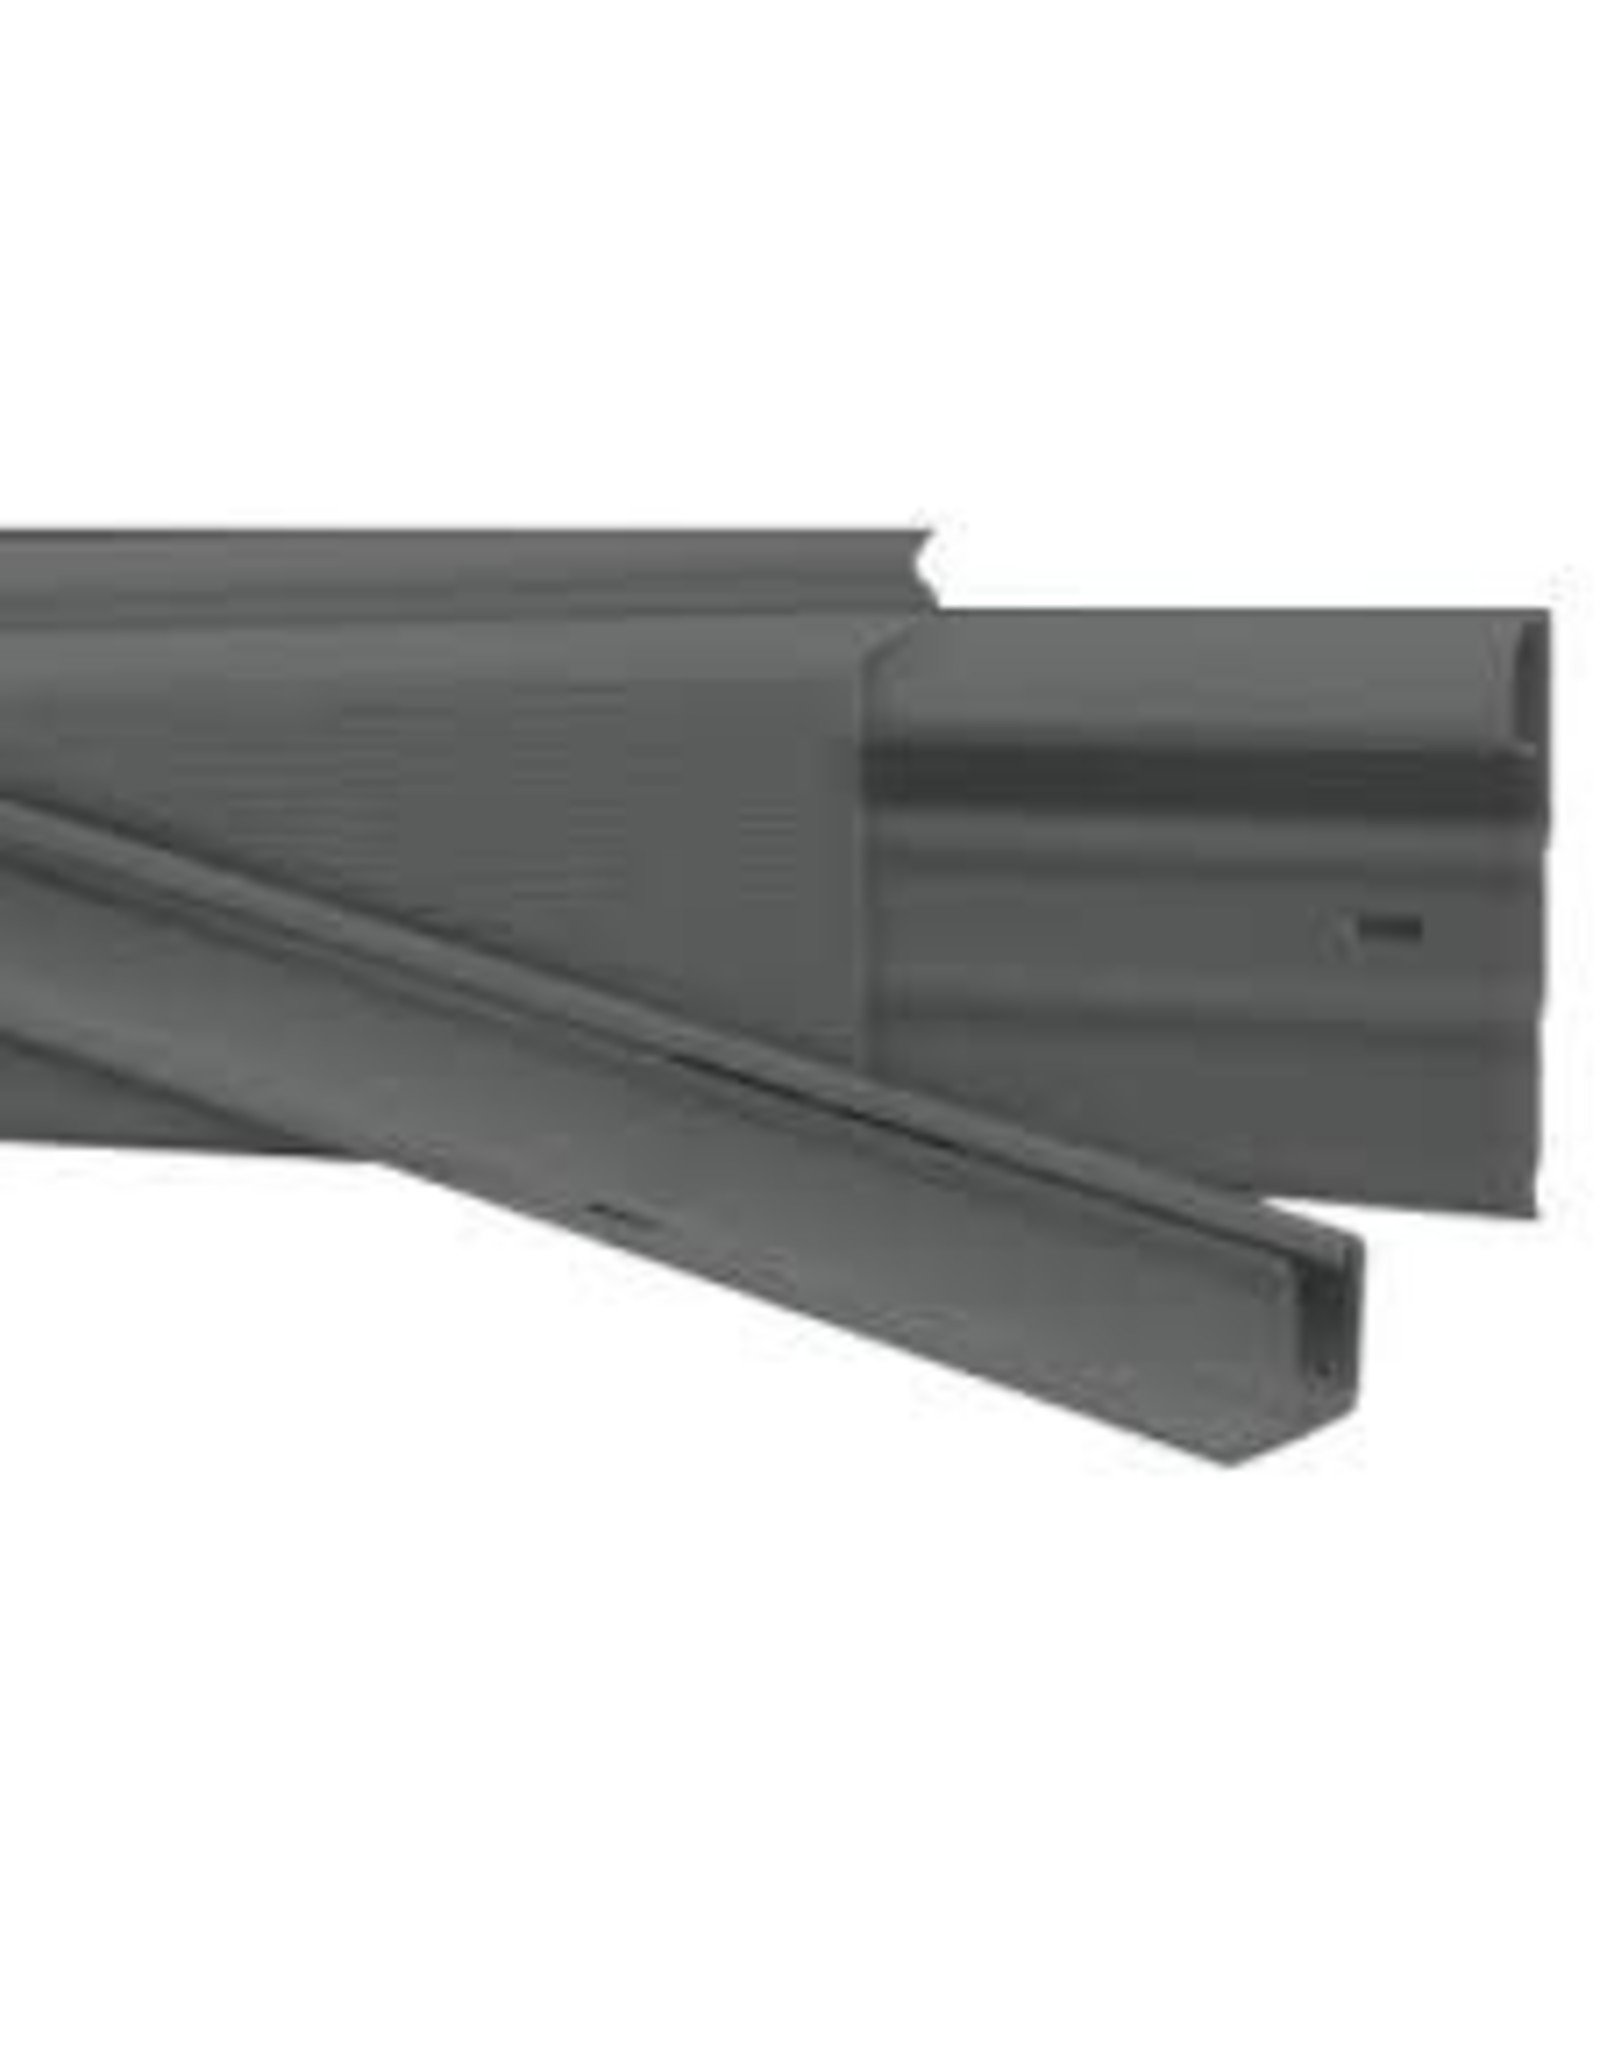 STYLCREST CHARCOAL  SKIRTING MOUNT